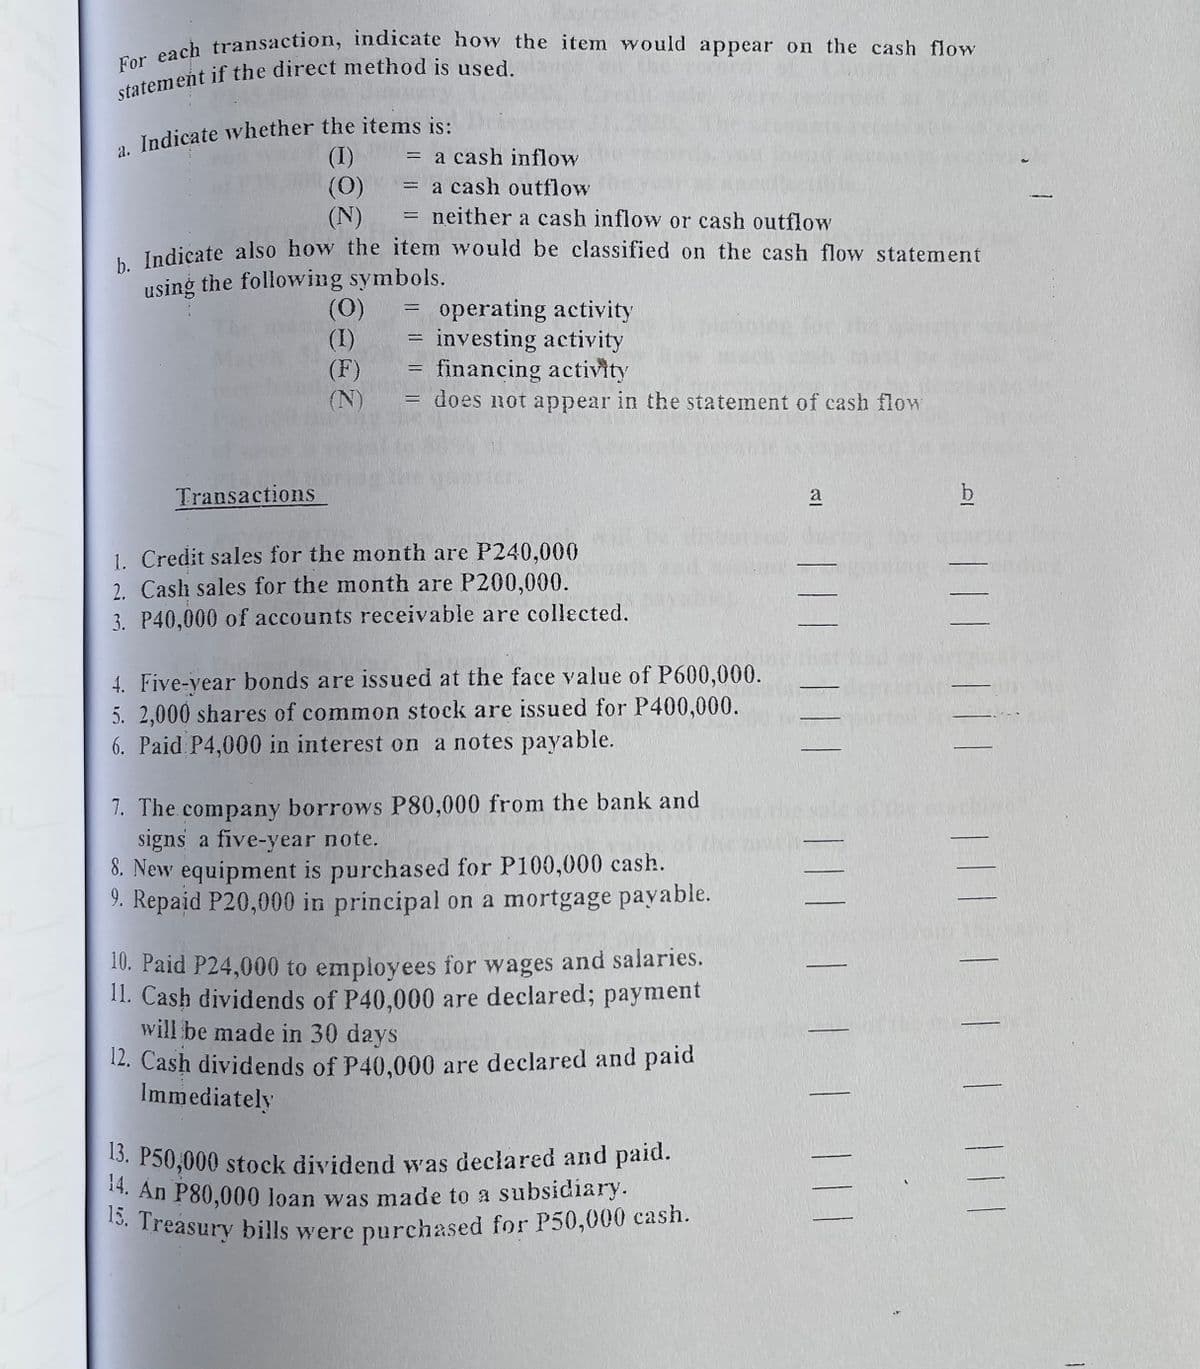 For each transaction, indicate how the item would appear on the cash flow
15. Treasury bills were purchased for P50,000 cash.
, Indicate whether the items is:
(I)
(0)
(N)
a cash inflow
= a cash outflow
= neither a cash inflow or cash outflow
L Indicate also how the item would be classified on the cash flow statement
using the following symbols.
(0)
(I)
(F)
(N)
= operating activity
investing activity
financing activity
does not appear in the statement of cash flow
%3D
Transactions
a
b
1. Credit sales for the month are P240,000
2. Cash sales for the month are P200,000.
3. P40,000 of accounts receivable are collected.
4. Five-year bonds are issued at the face value of P600,000.
5. 2,000 shares of common stock are issued for P400,000.
6. Paid P4,000 in interest on a notes payable.
7. The company borrows P80,000 from the bank and
signs a five-year note.
8. New equipment is purchased for P100,000 cash.
9. Repaid P20,000 in principal on a mortgage payable.
10. Paid P24,000 to employees for wages and salaries.
11. Cash dividends of P40,000 are declared; payment
will be made in 30 days
12. Cash dividends of P40,000 are declared and paid
Immediately
15. P50,000 stock dividend was declared and paid.
14. An P80,000 loan was made to a subsidiary.
*. Treasury bills were purchased for P50,000 cash.
| ||
